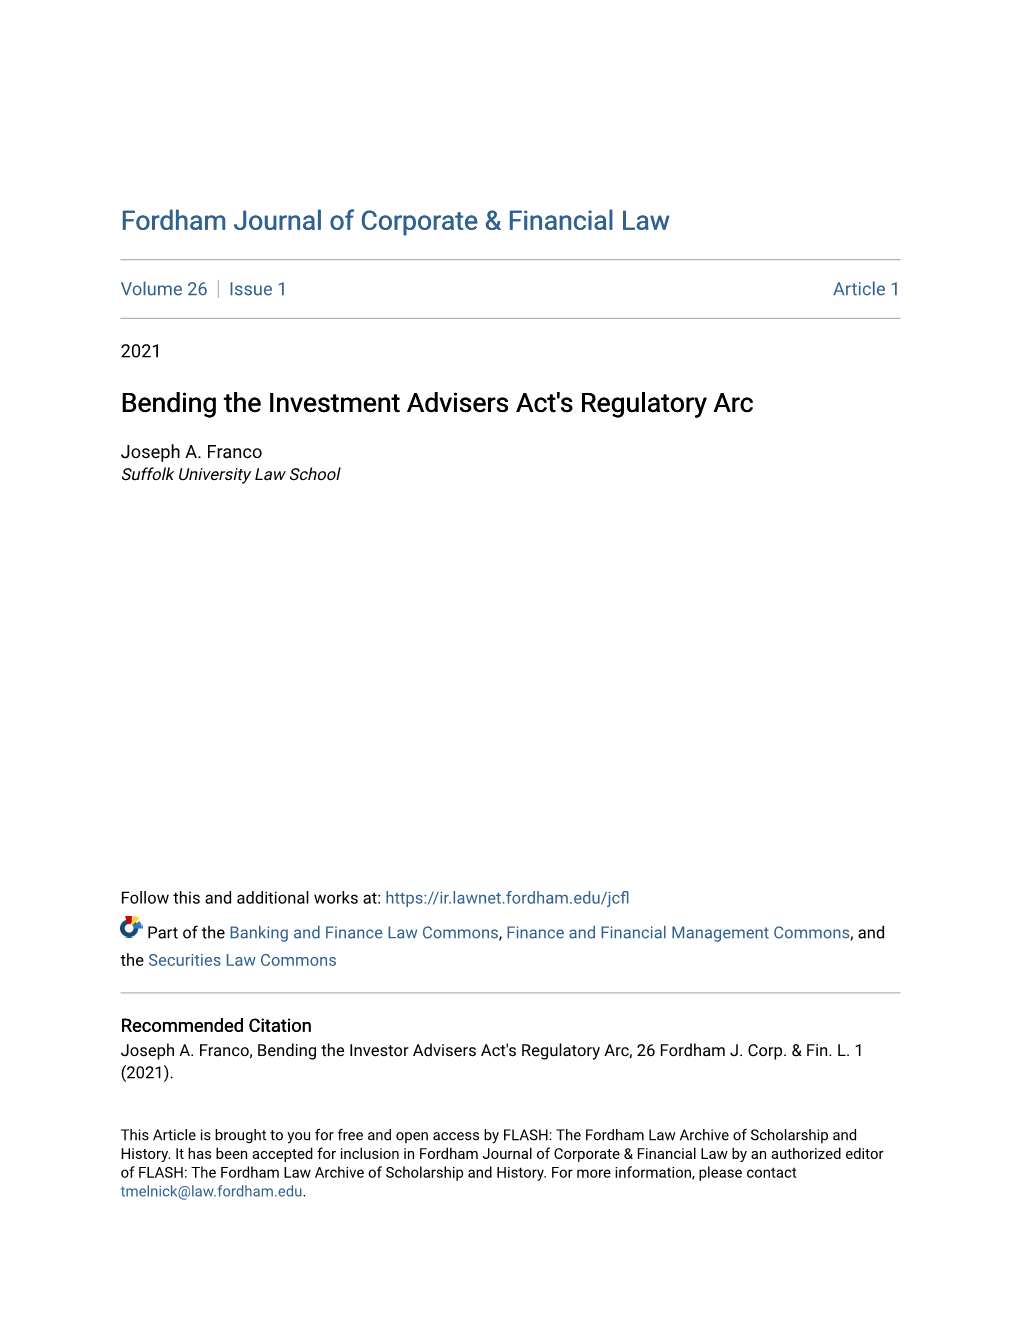 Bending the Investment Advisers Act's Regulatory Arc